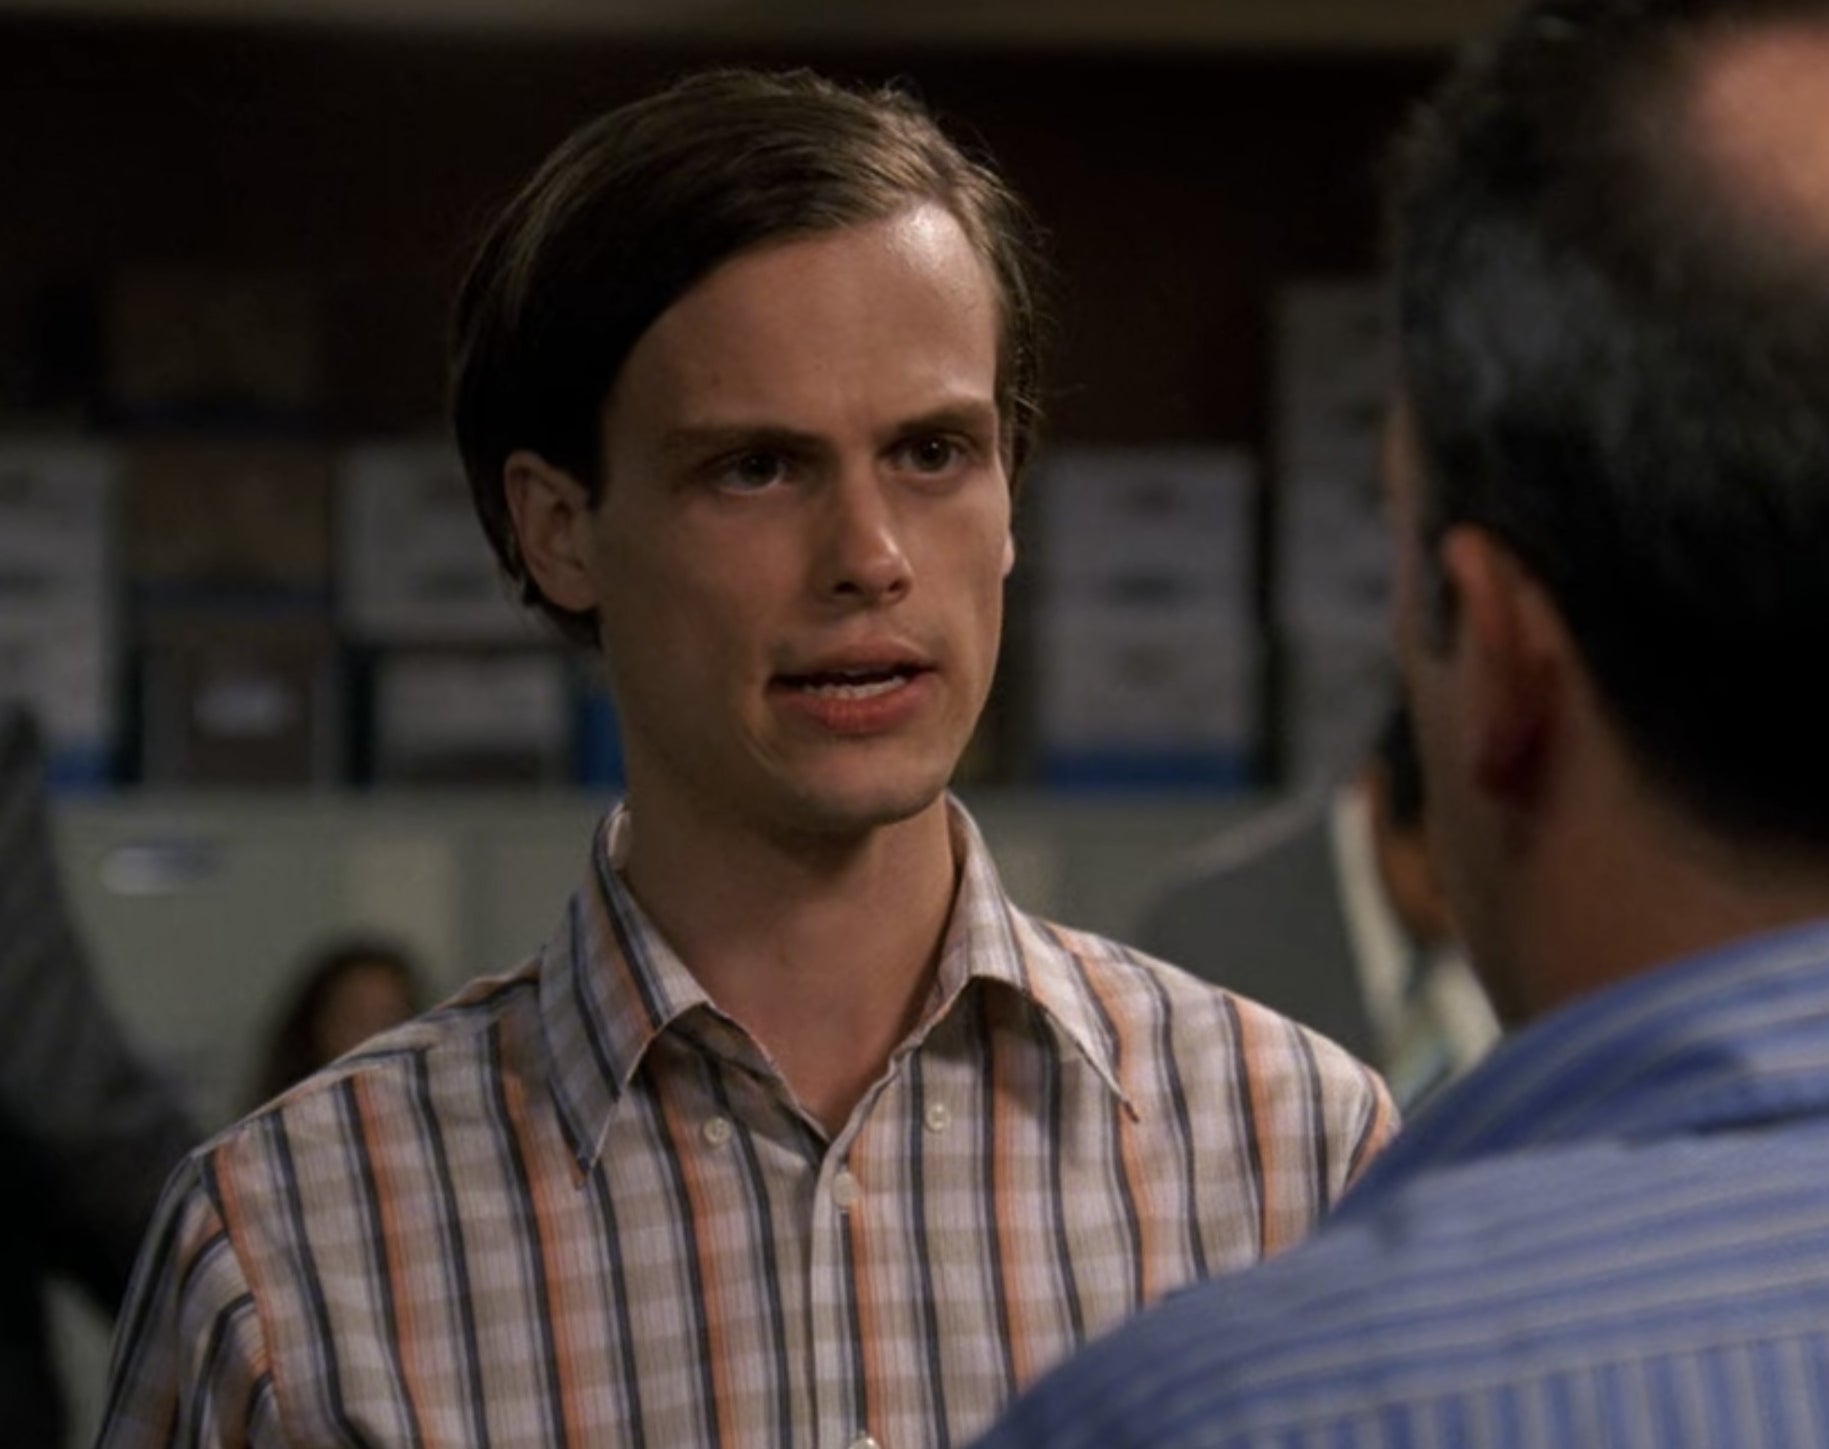 Spencer Reid from Criminal Minds talking to a person